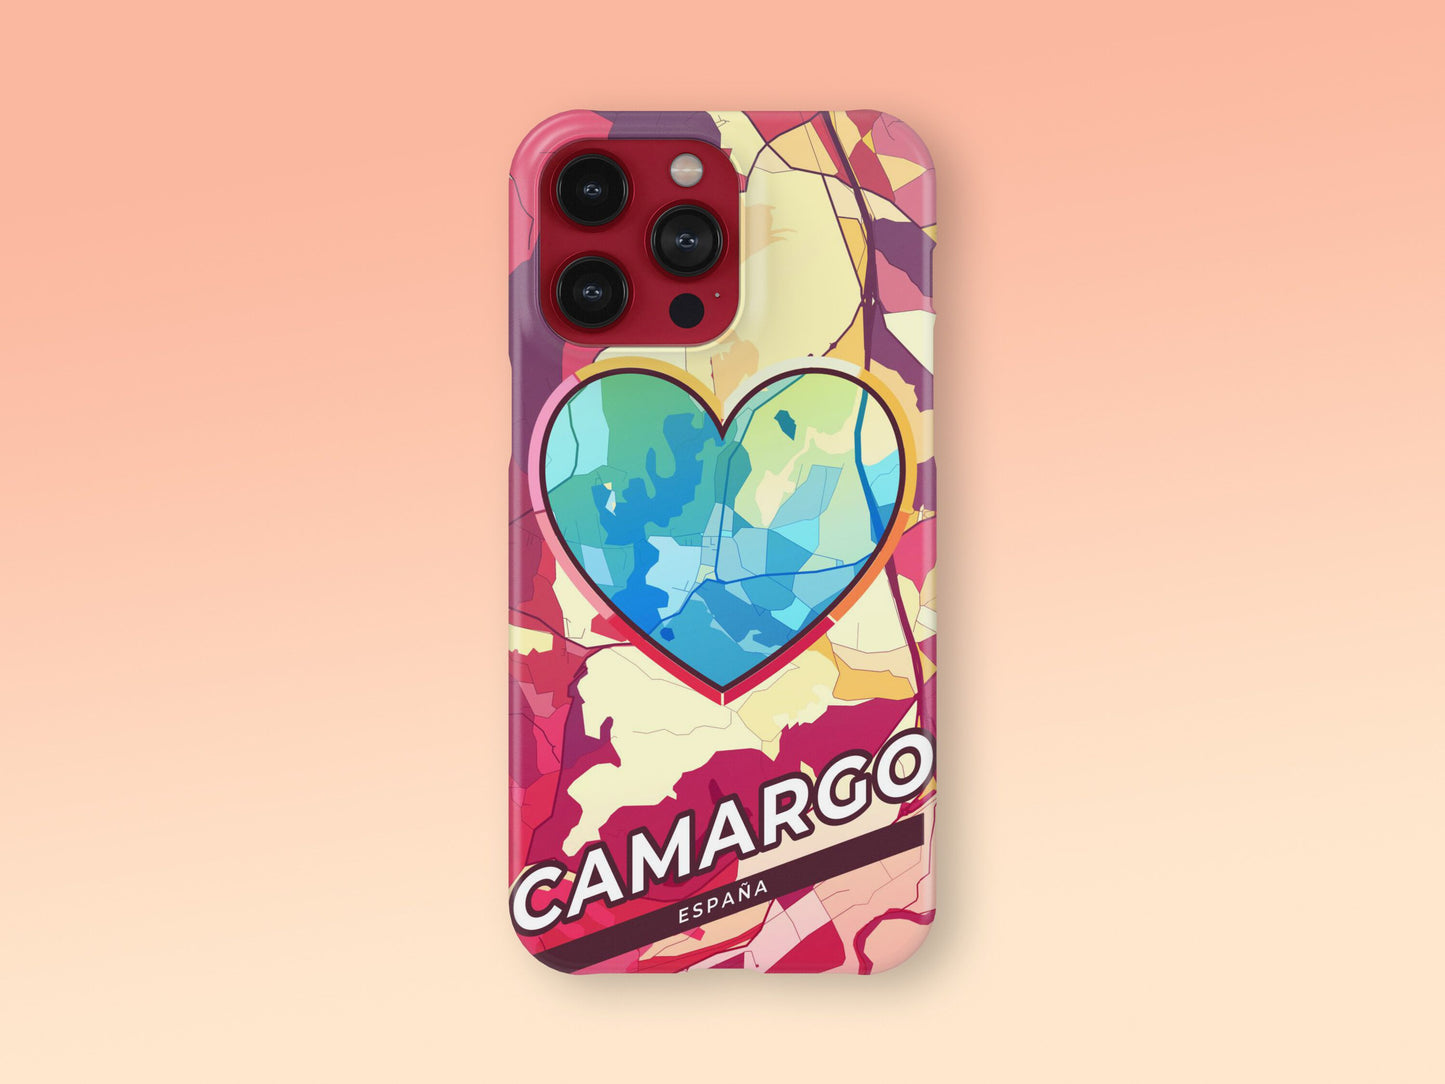 Camargo Spain slim phone case with colorful icon. Birthday, wedding or housewarming gift. Couple match cases. 2